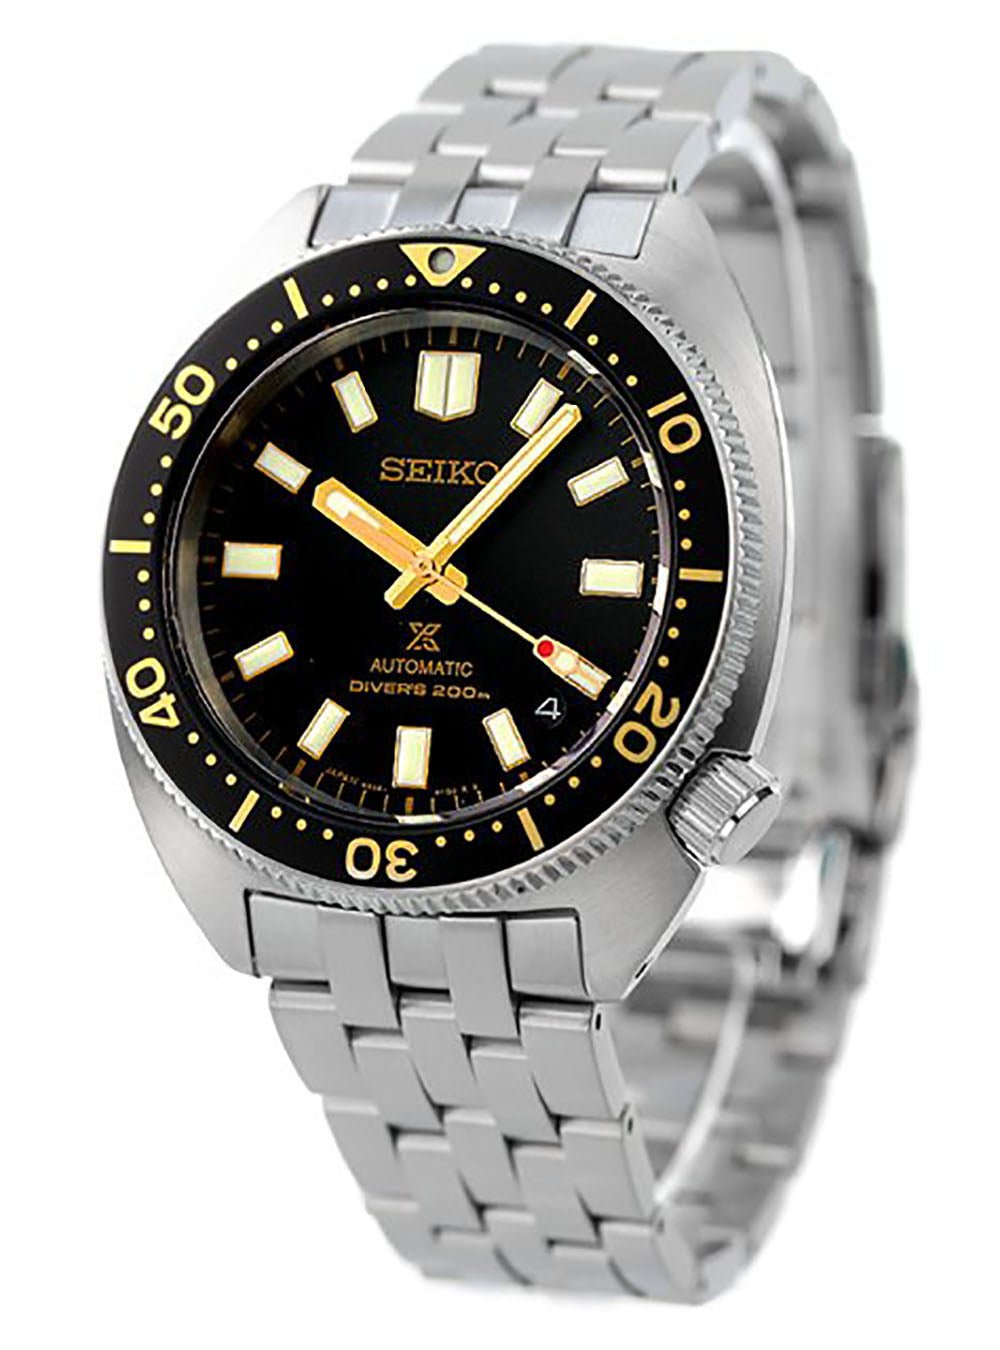 SEIKO PROSPEX 200M DIVER AUTOMATIC SBDC173 MADE IN JAPAN JDM Only 1 left in stockWatchesjapan-select